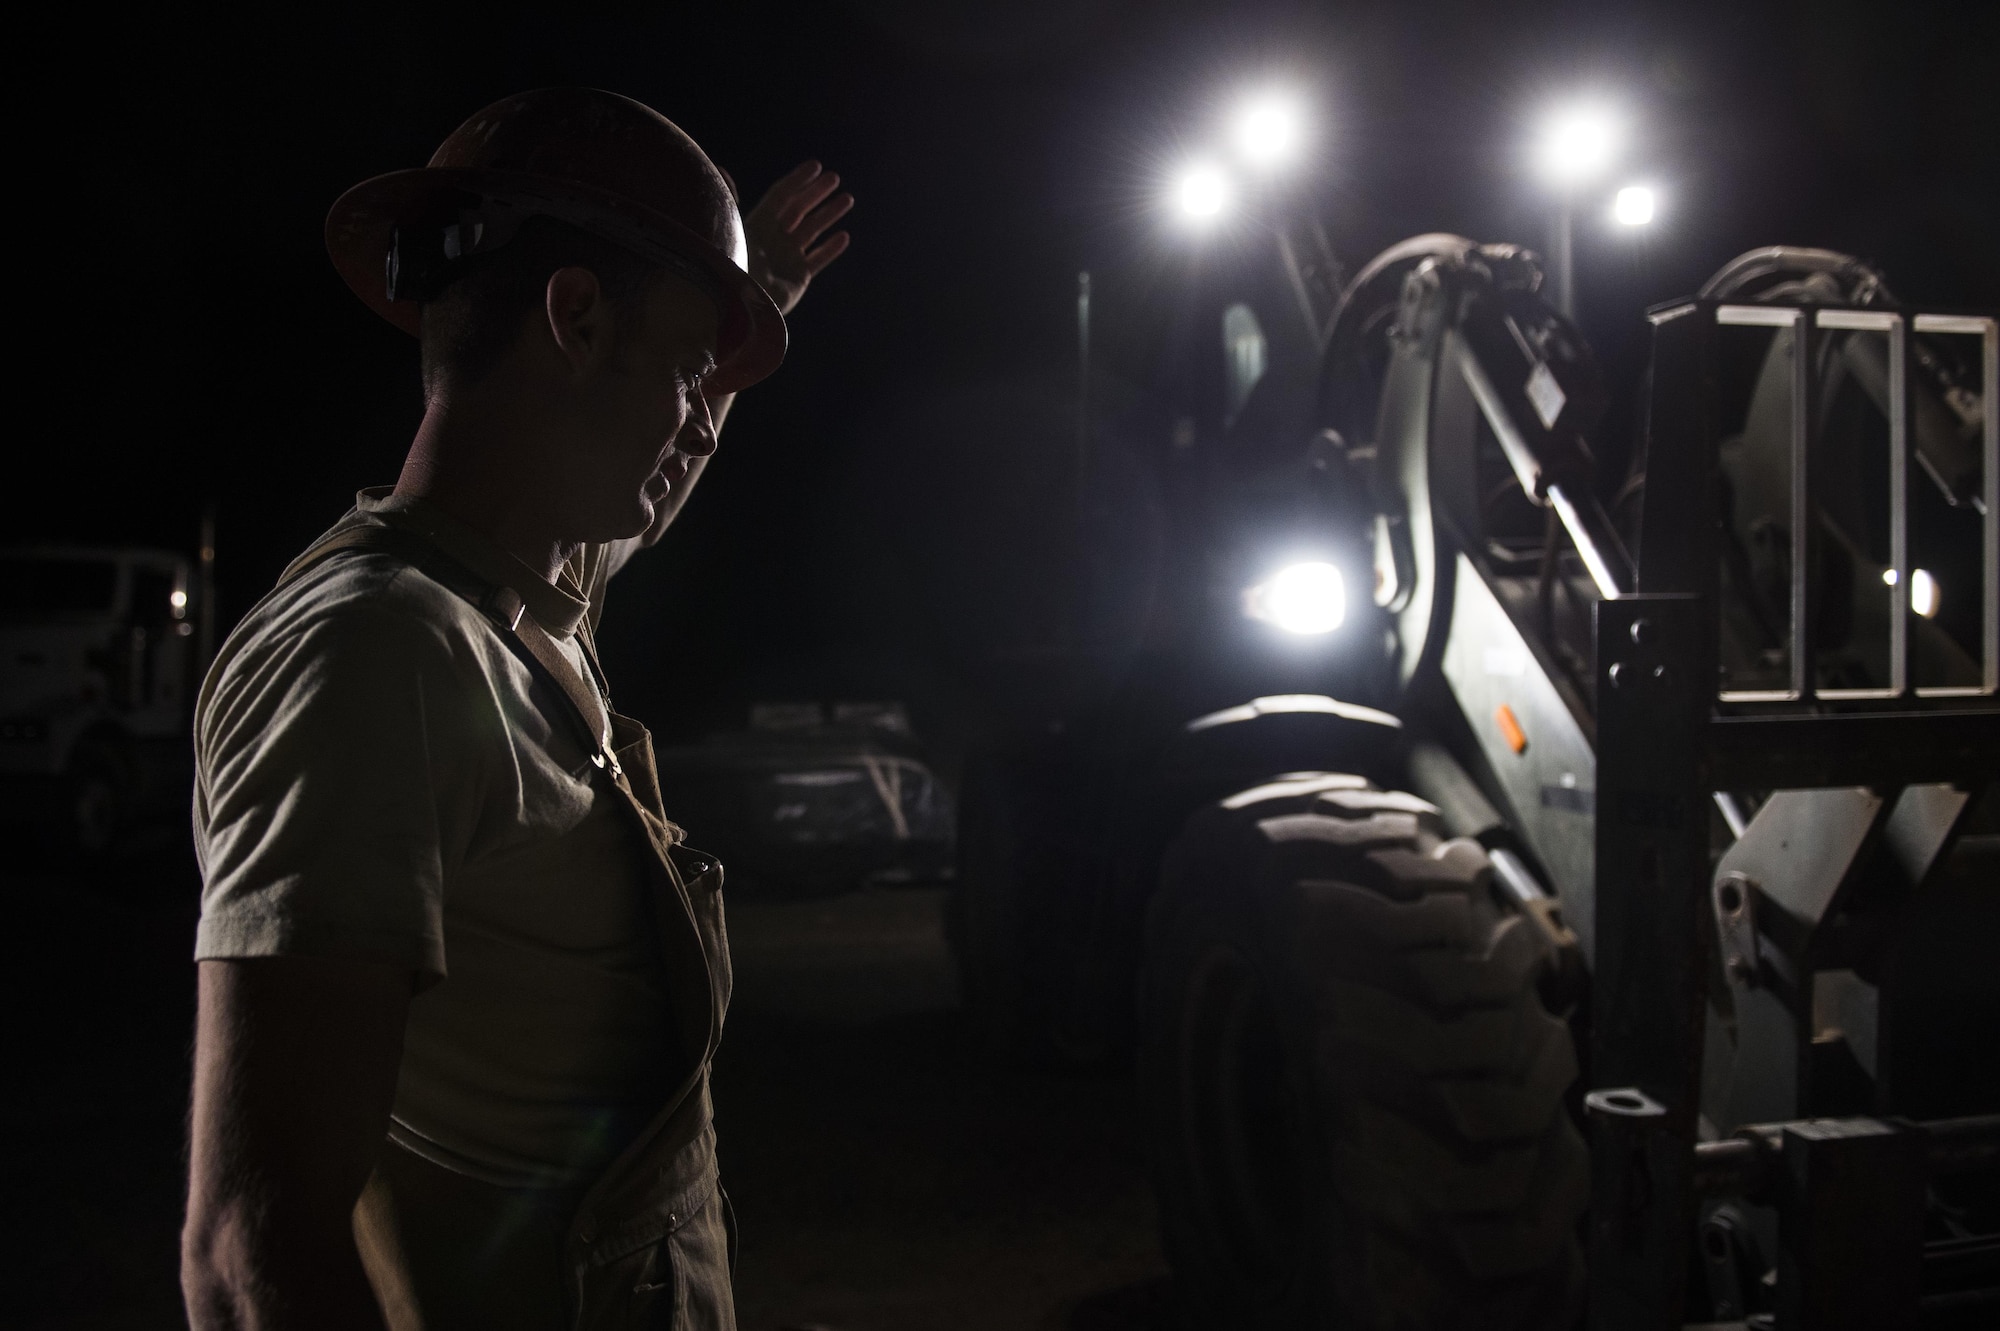 Tech. Sgt. Randy Blount, a well drilling technician assigned to the 557th Expeditionary Red Horse Squadron, guides a forklift to transport a pallet of cement at Al Taqaddum Air Base, Iraq, June 3, 2016. The 557th ERHS well drilling team are obtaining an organic water source for Al Taqaddum. They are the first Air Force entity to drill wells in Iraq.
(U.S. Air Force photo/Staff Sgt. Larry E. Reid Jr., Released)